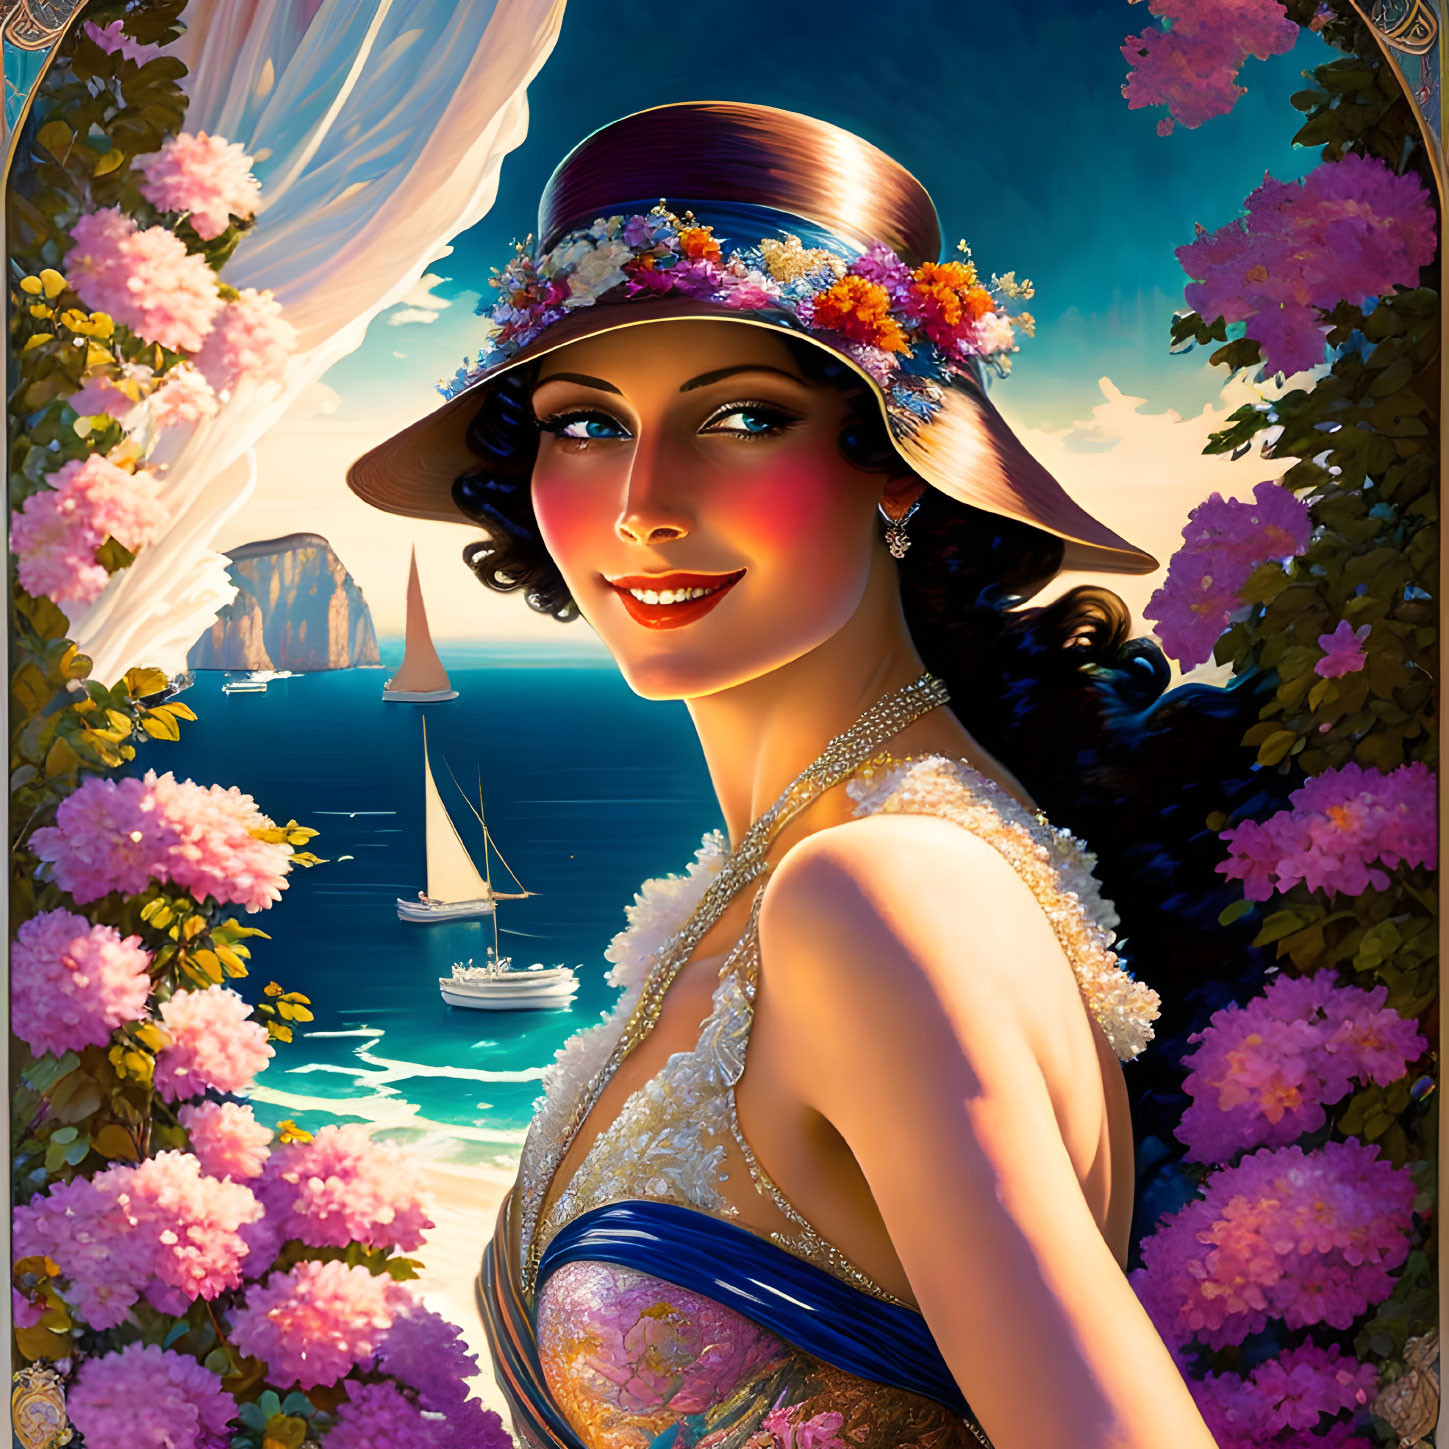 Illustration of Smiling Woman in Art Deco Style with Coastal Scene